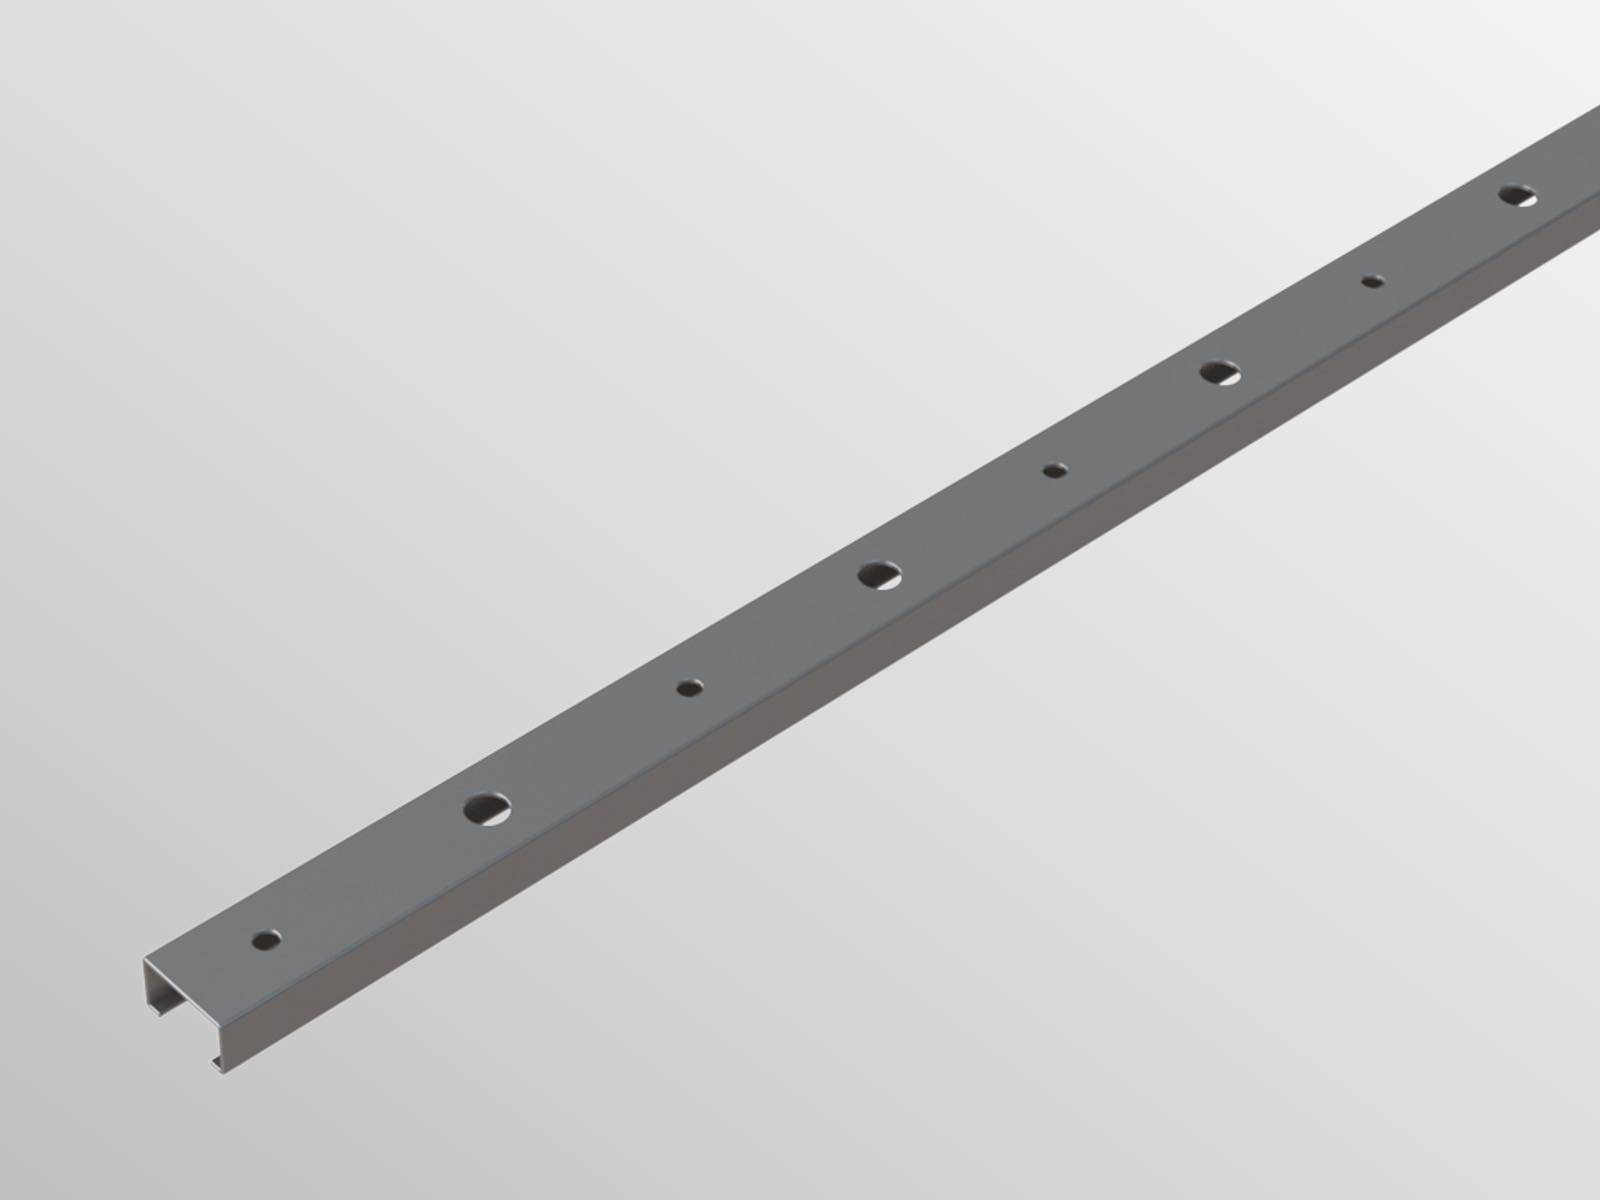 Channels - For Slot Cavity Wall Ties